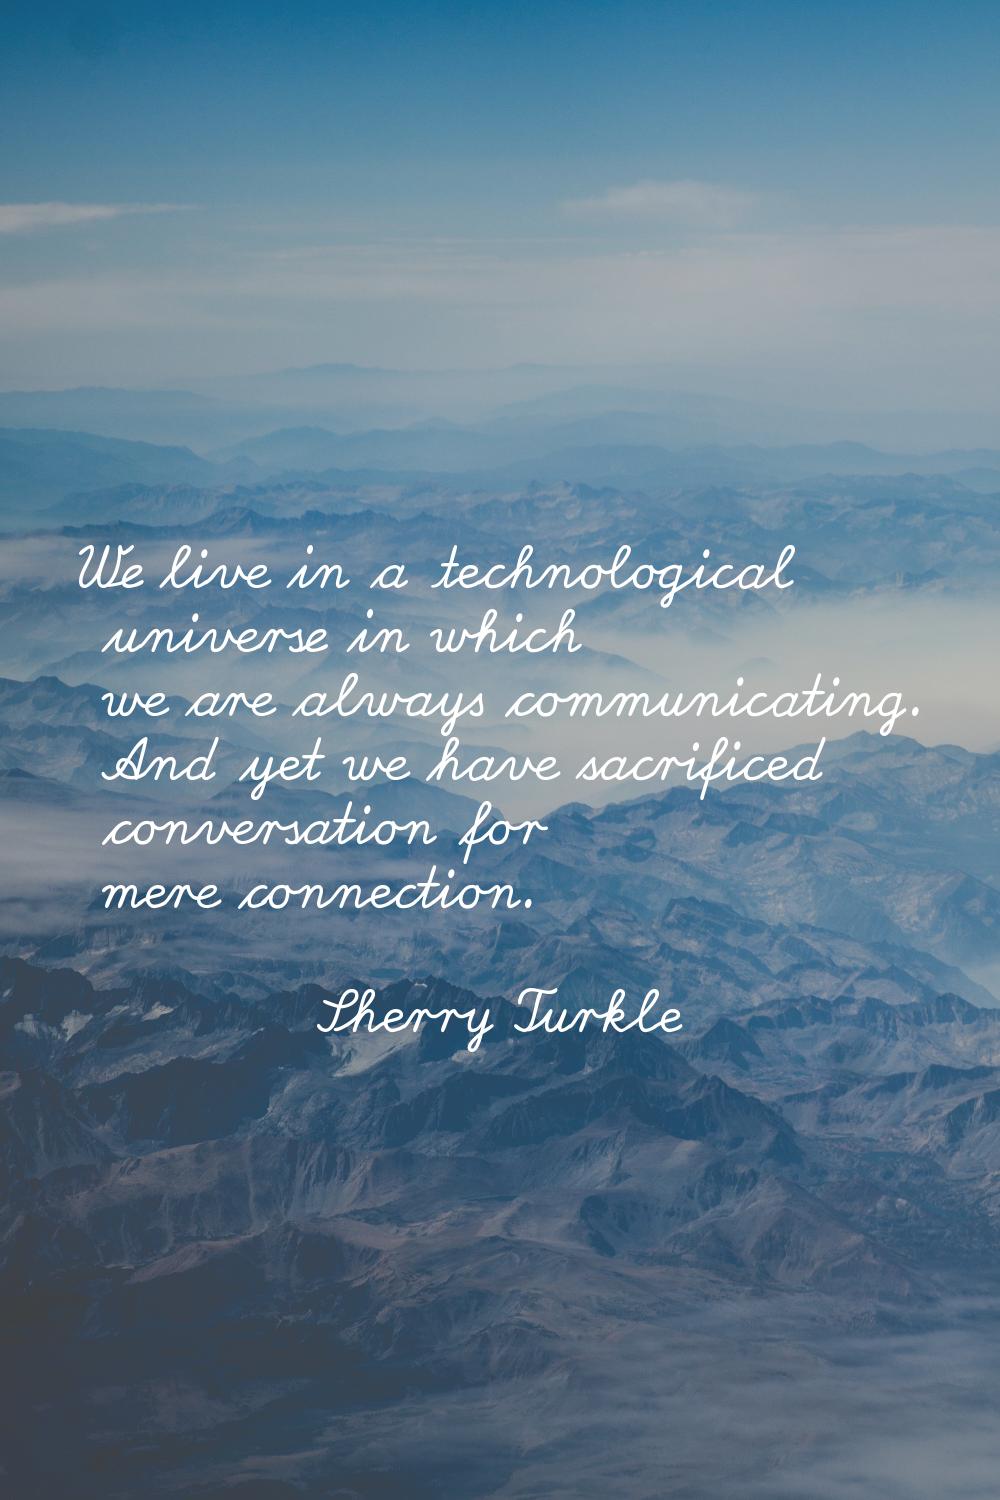 We live in a technological universe in which we are always communicating. And yet we have sacrifice